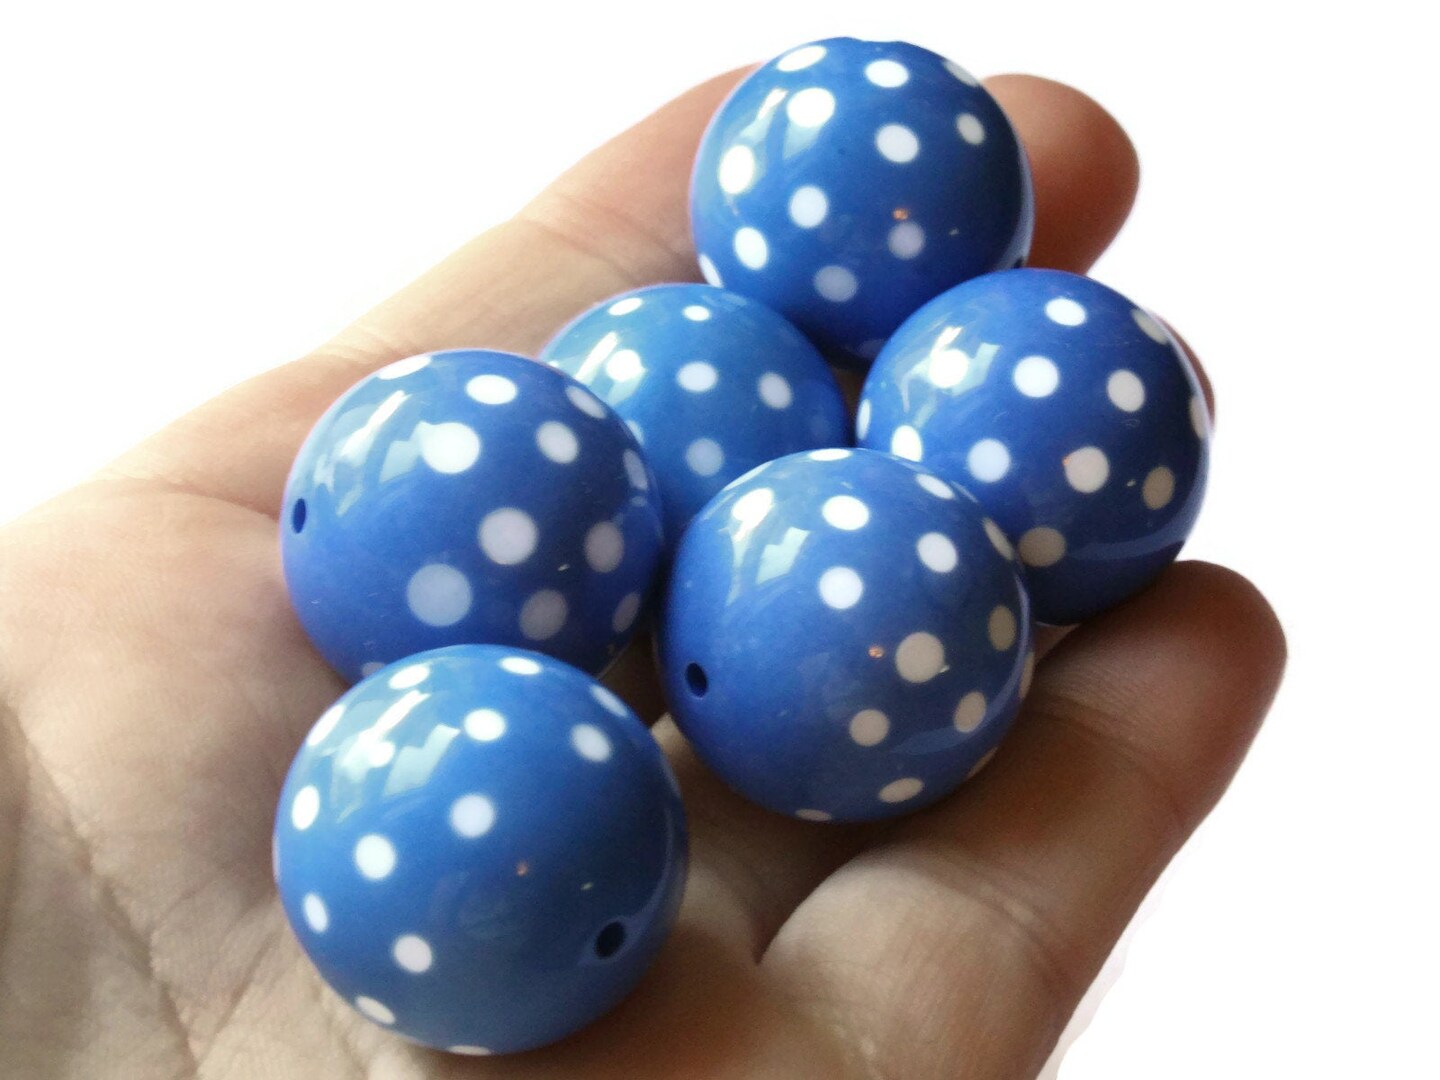 6 22mm Large Round Polka Dot Blue Vintage Lucite Beads by Smileyboy | Michaels